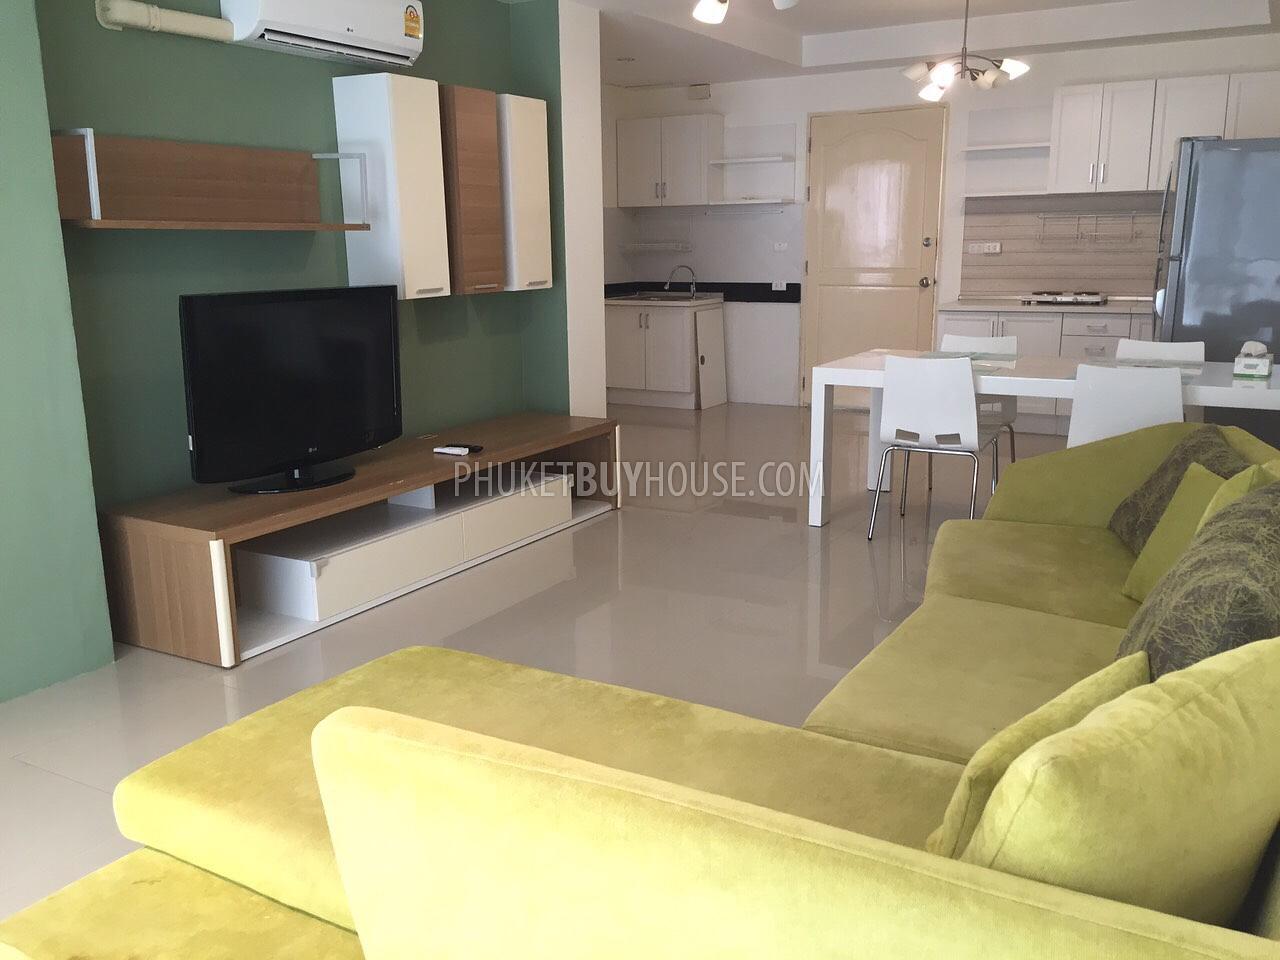 PAT5118: One bedroom apartment in the heart of Patong. Фото #9